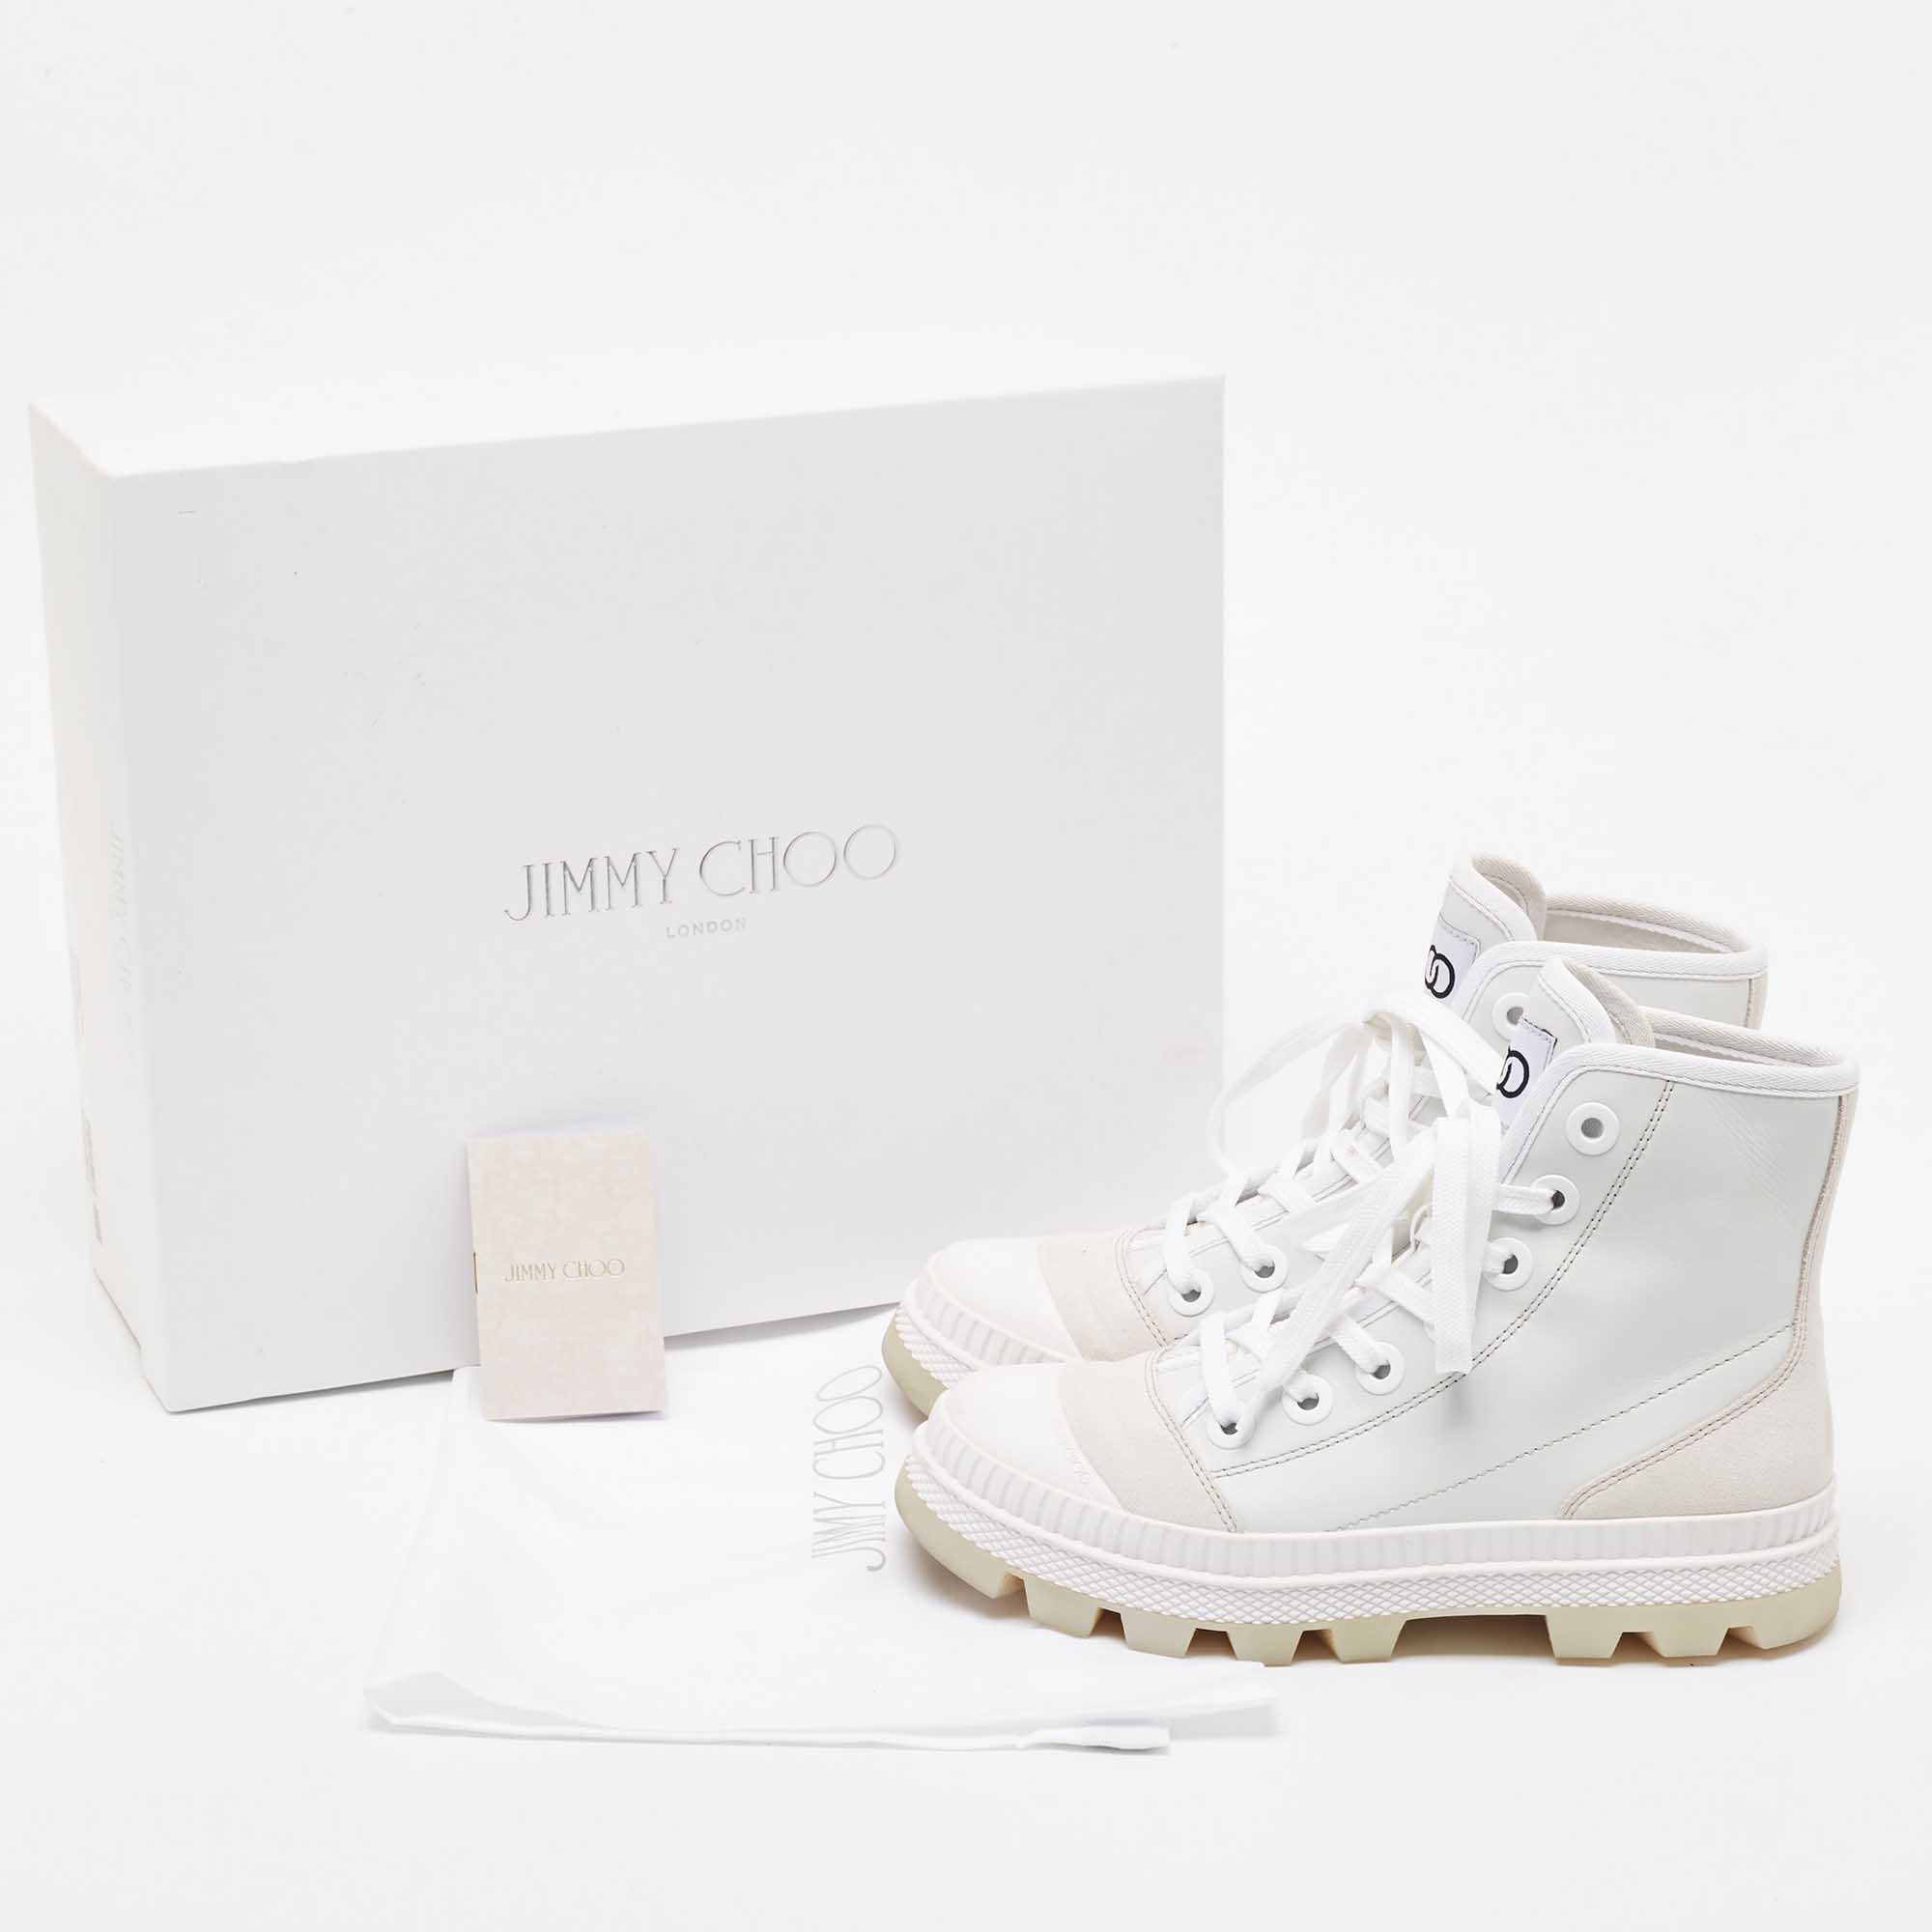 Jimmy Choo White/Grey Suede And Leather High Top Sneakers Size 37.5